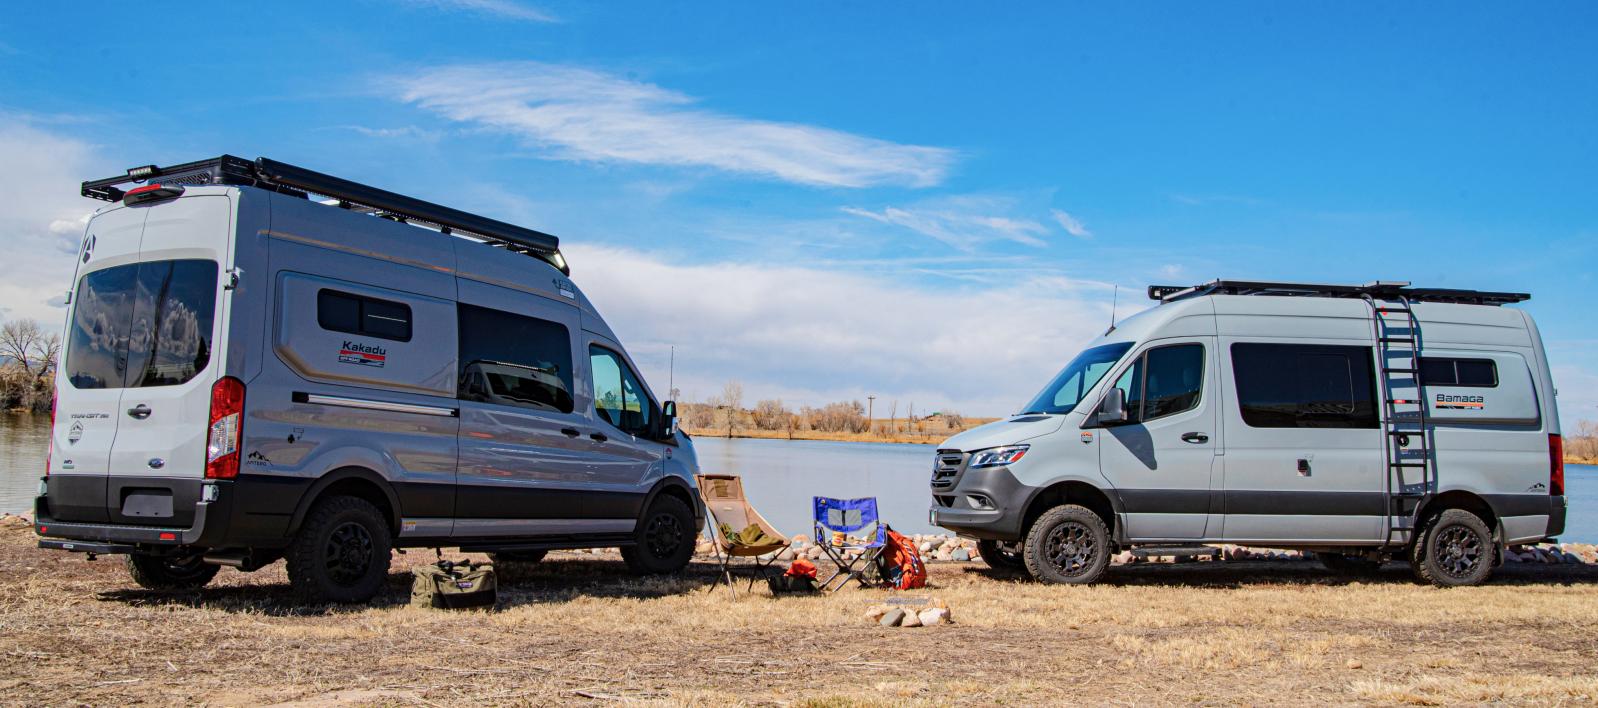 Two Antero Adventure Vans facing each other with a lake in the background